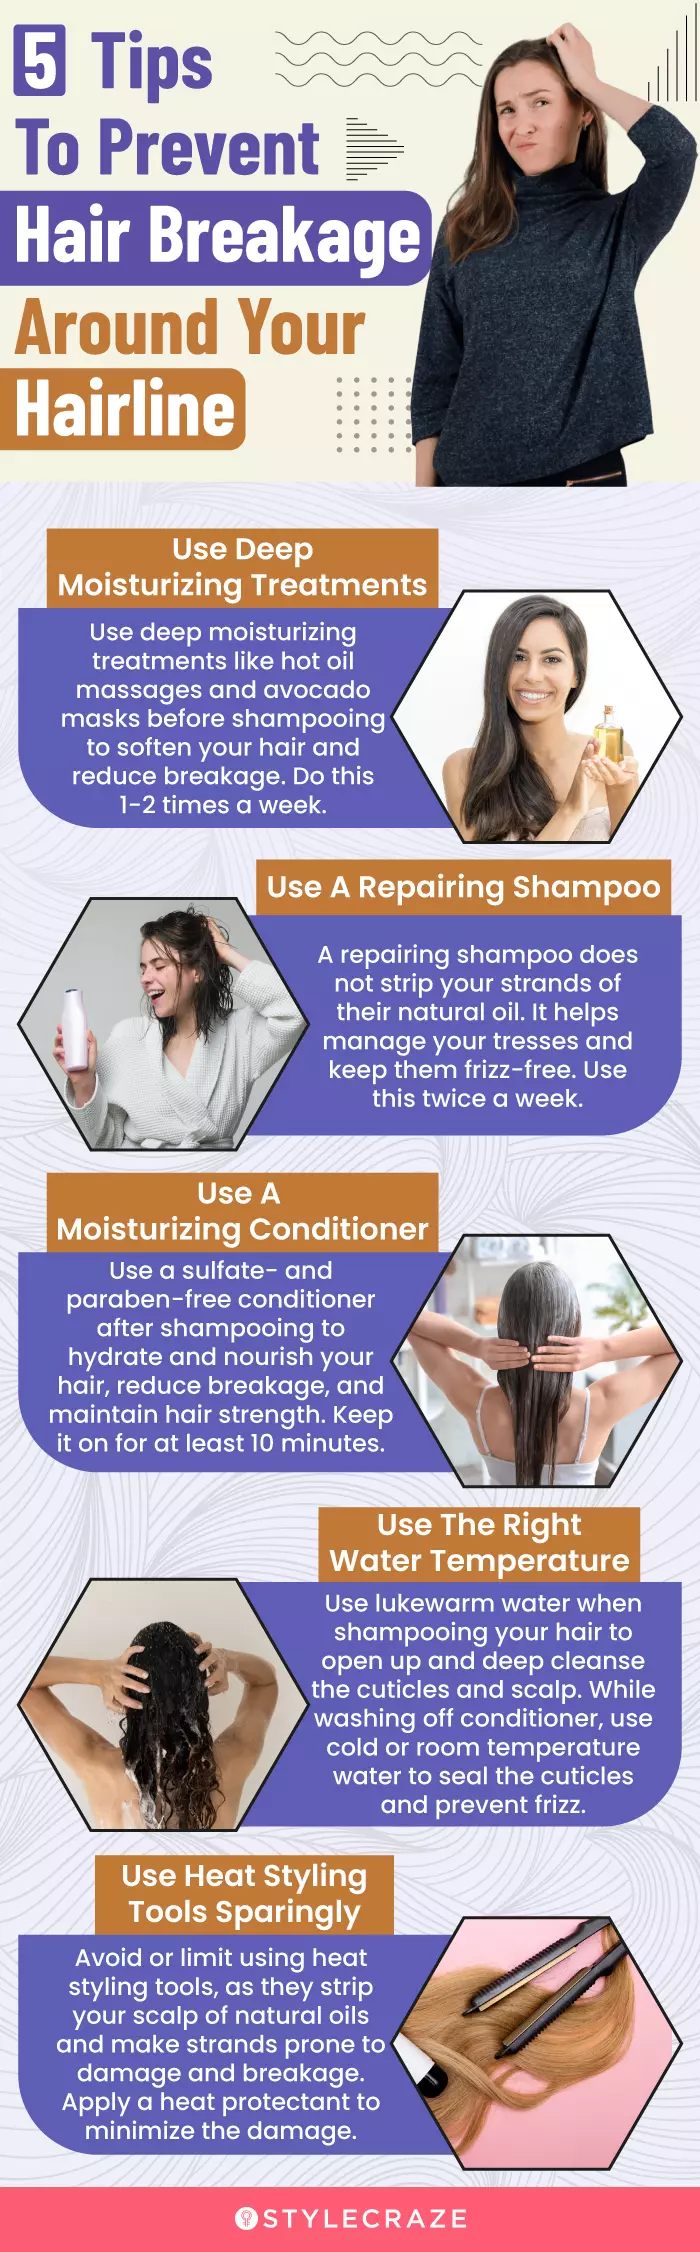 5 tips to prevent hair breakage around your hairline (infographic)